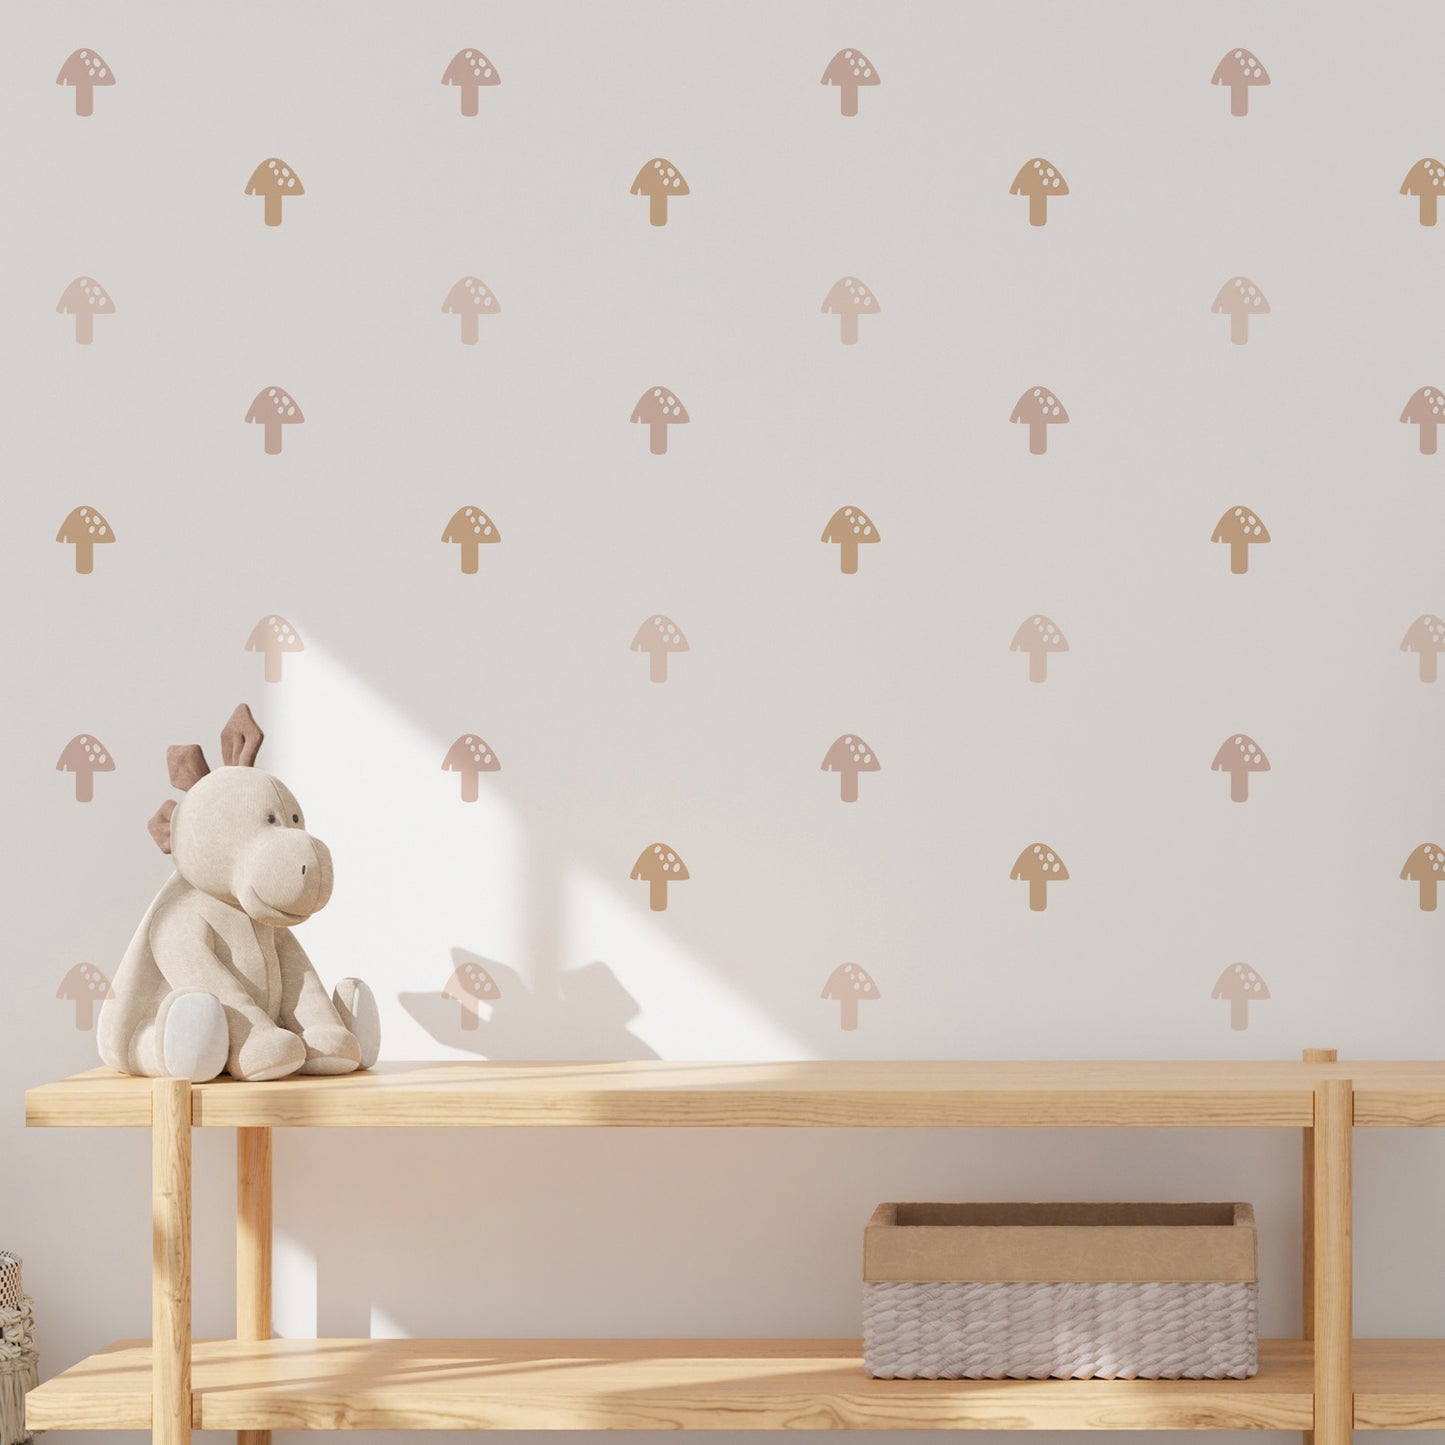 Toadstool Wall Stickers